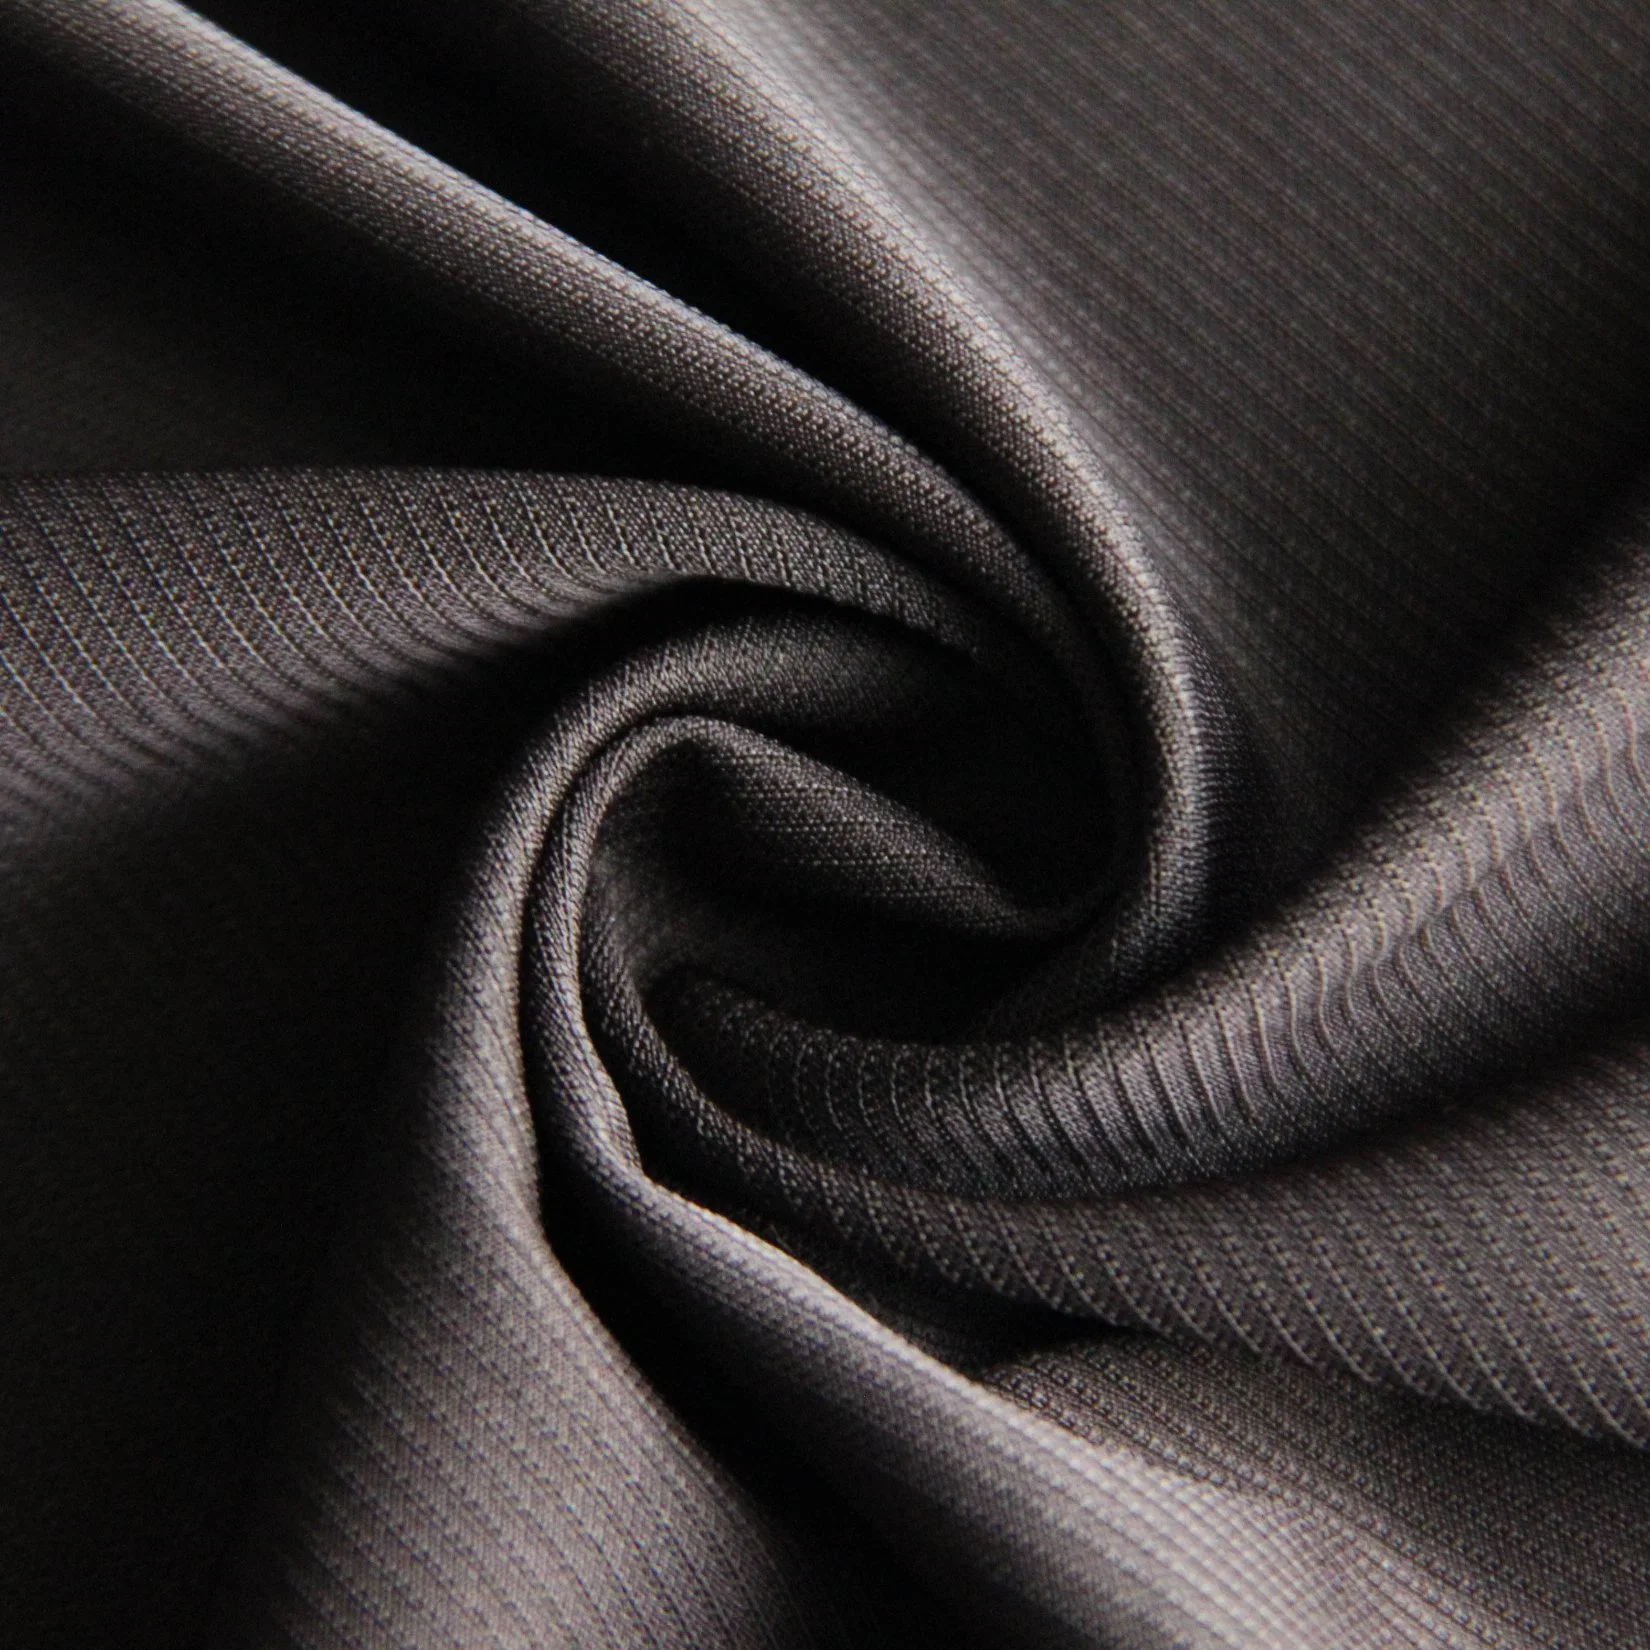 75D+40d Polyester Spandex/Lycra Knitting Swimwear Fabric with Special Texture for Garments/Sportswear